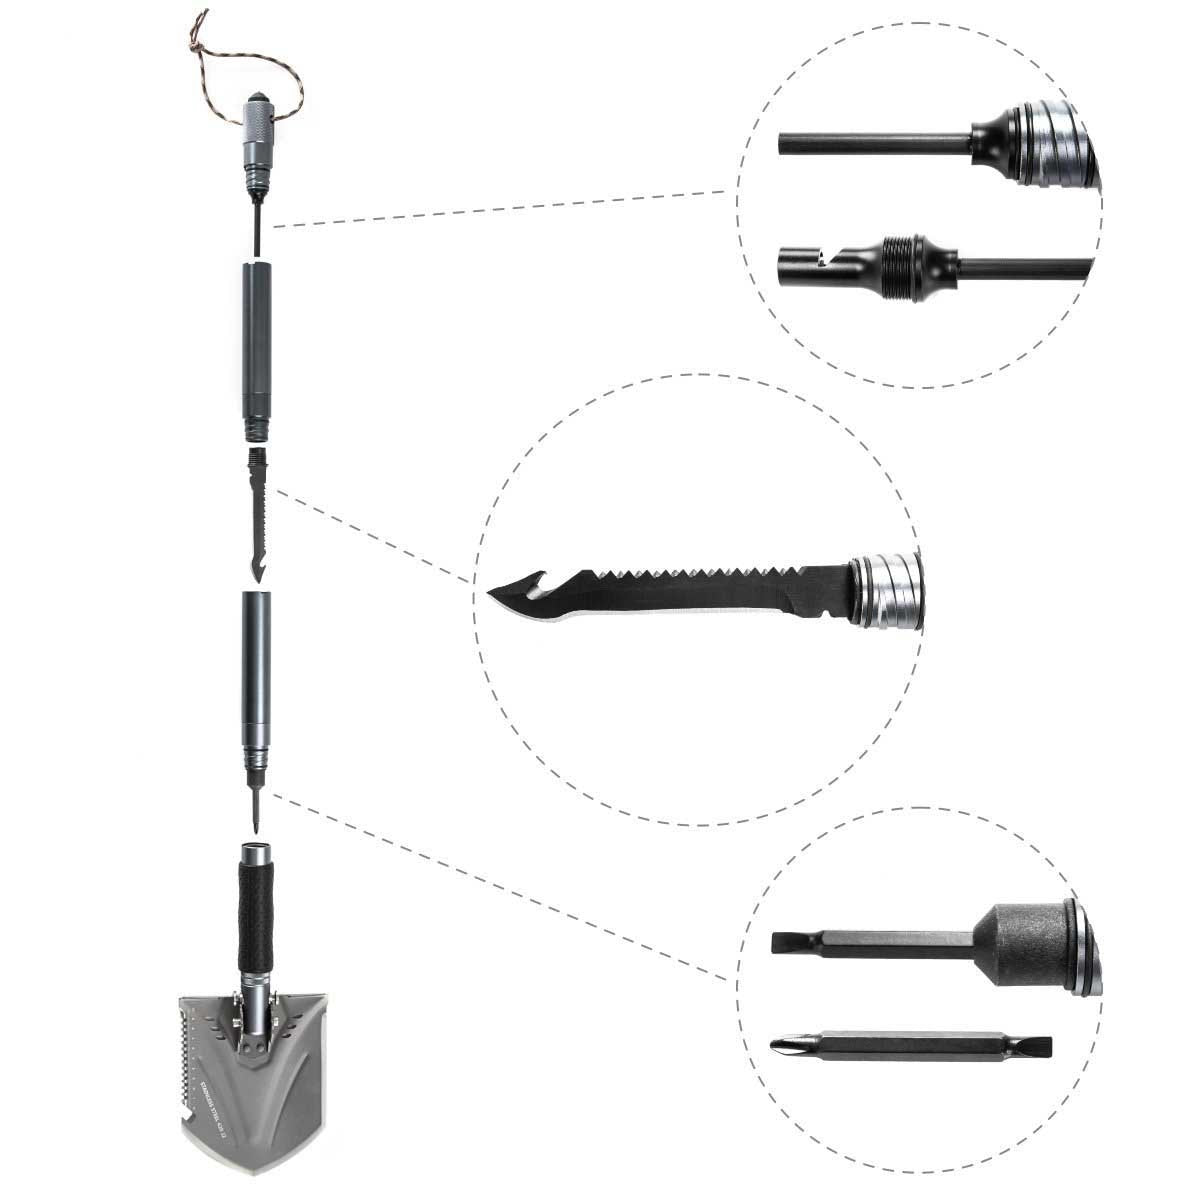 Multifunctional 29-inch Assembling Shovel Tool Set for Camping, Outdoor